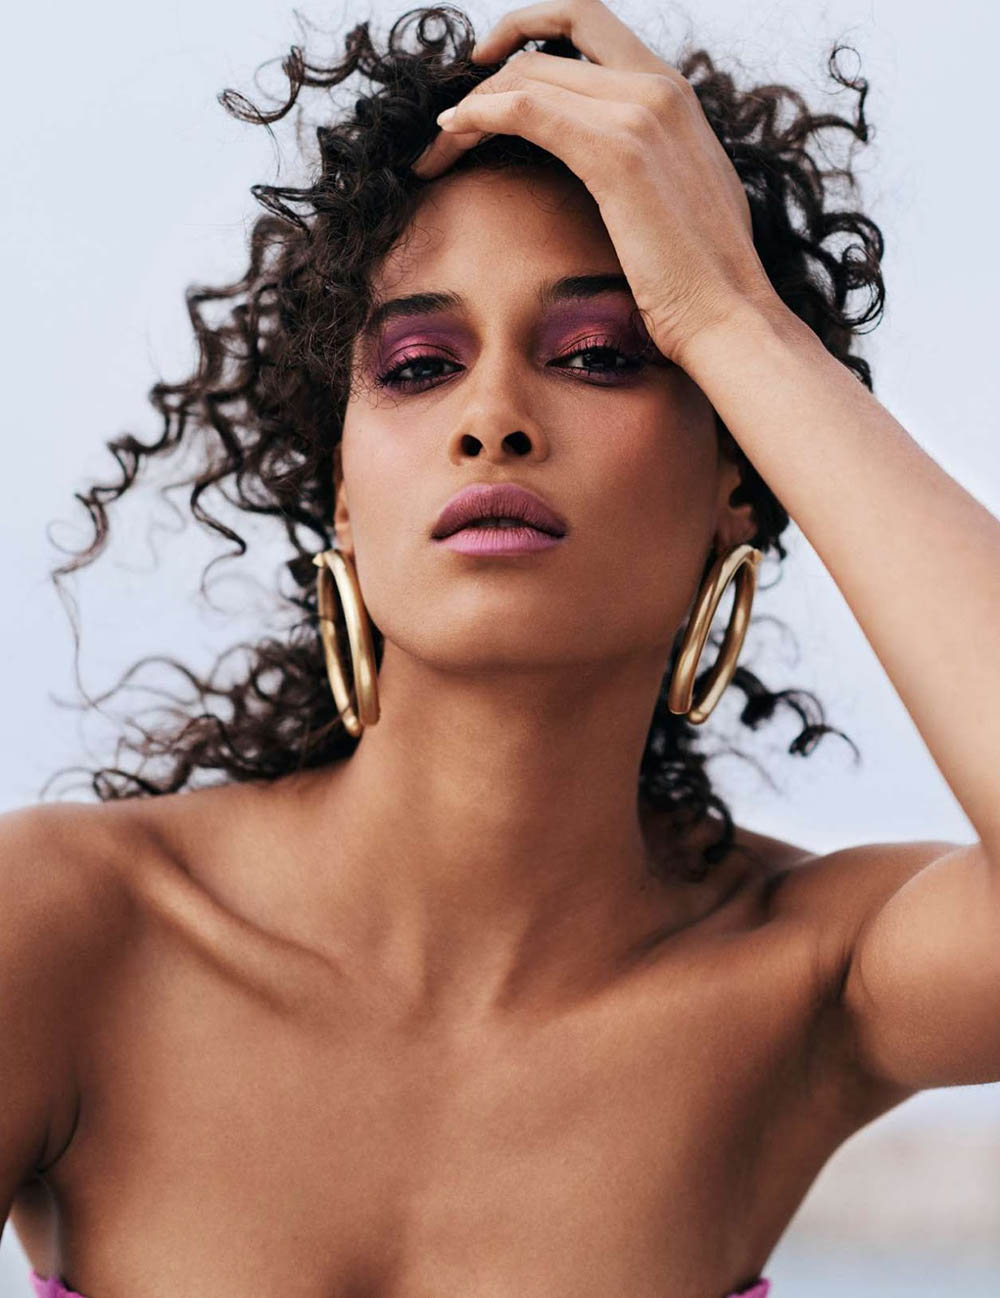 Cindy Bruna covers Elle France May 24th, 2019 by Jan Welters